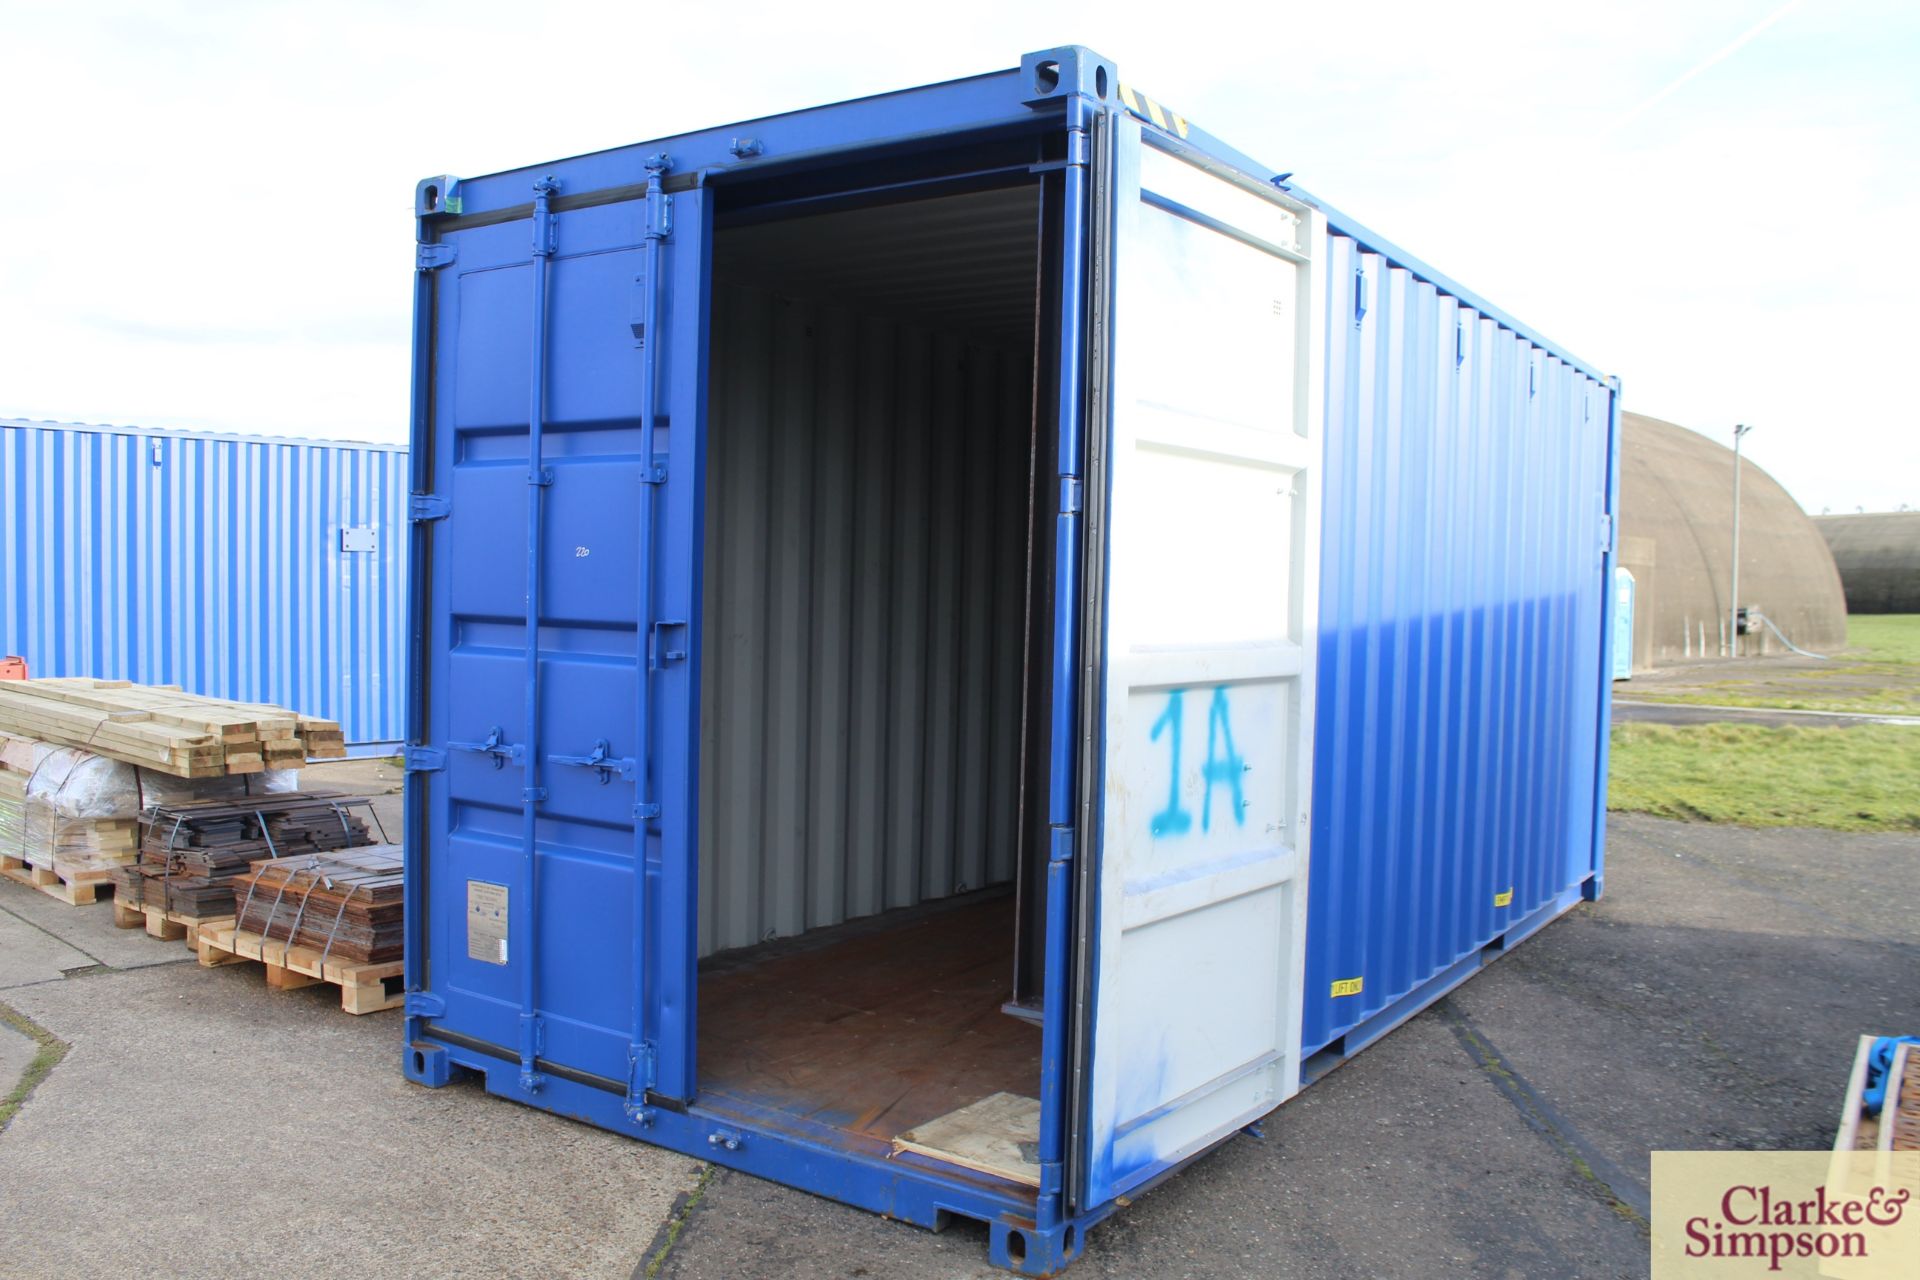 20ft x 9ft6in high shipping container. 2019. Partially reinforced to interior to include plates - Image 8 of 19